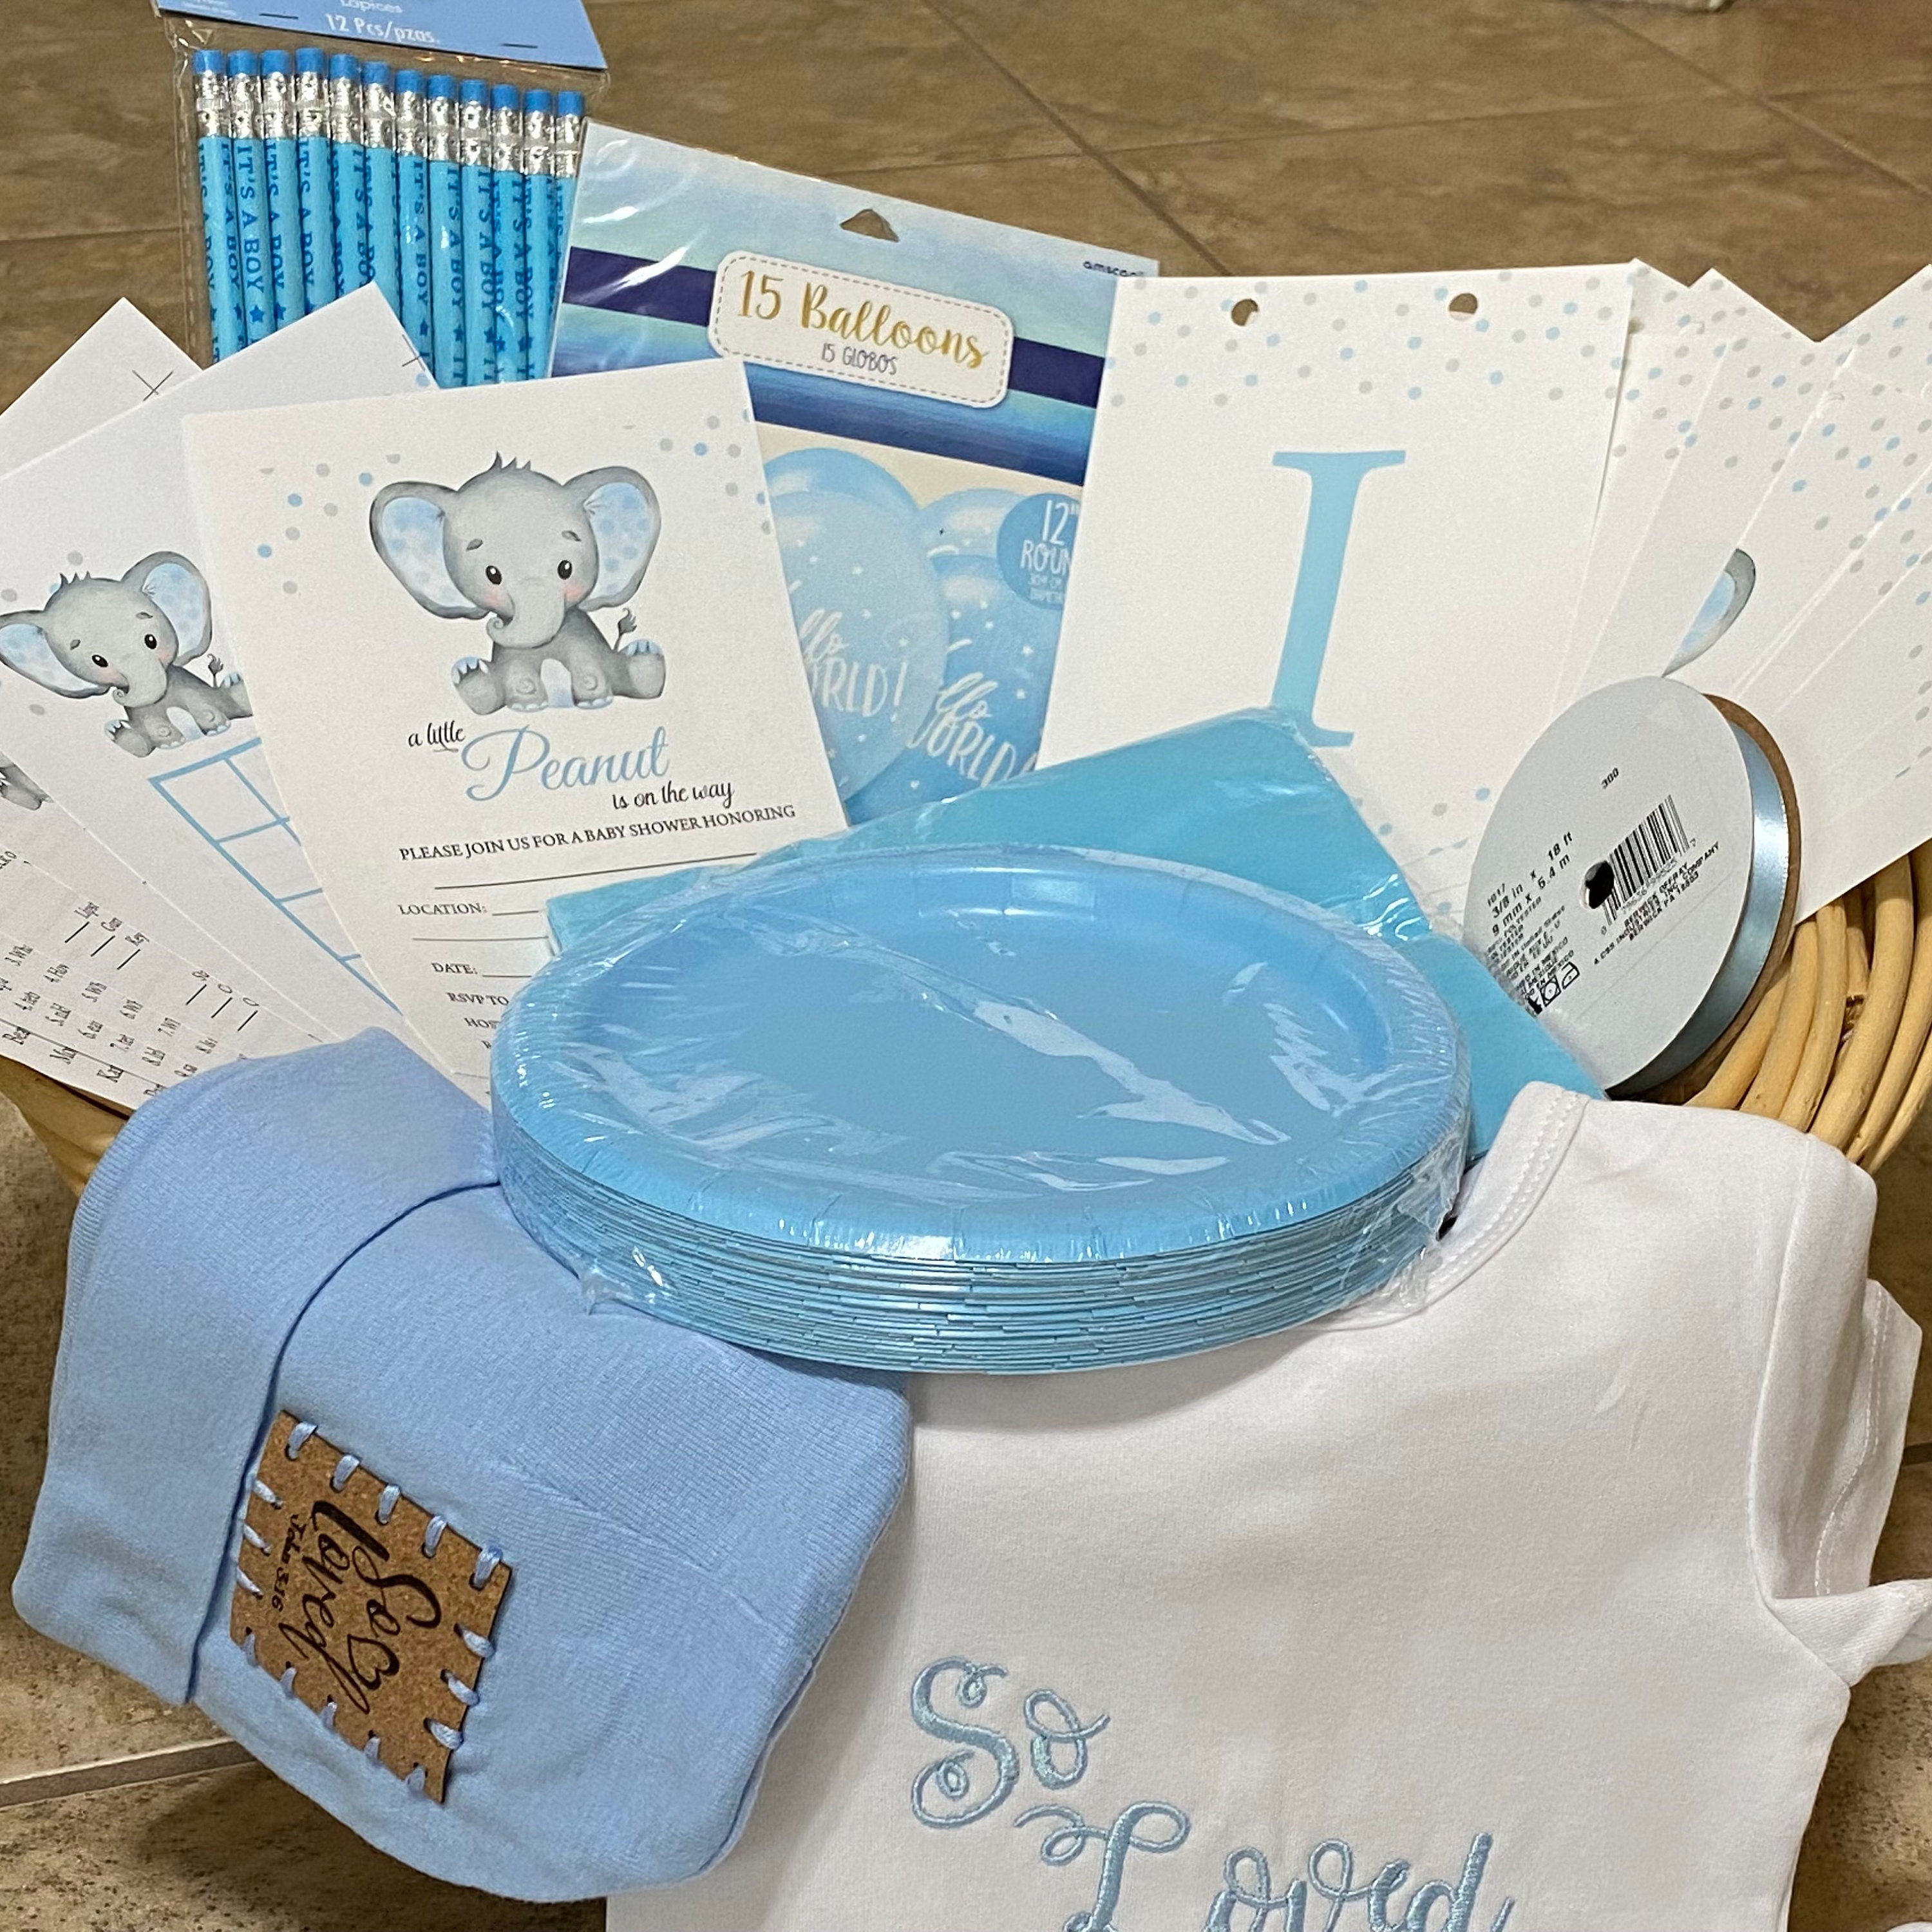 8 Ideas for Baby Shower Gifts for a Boy